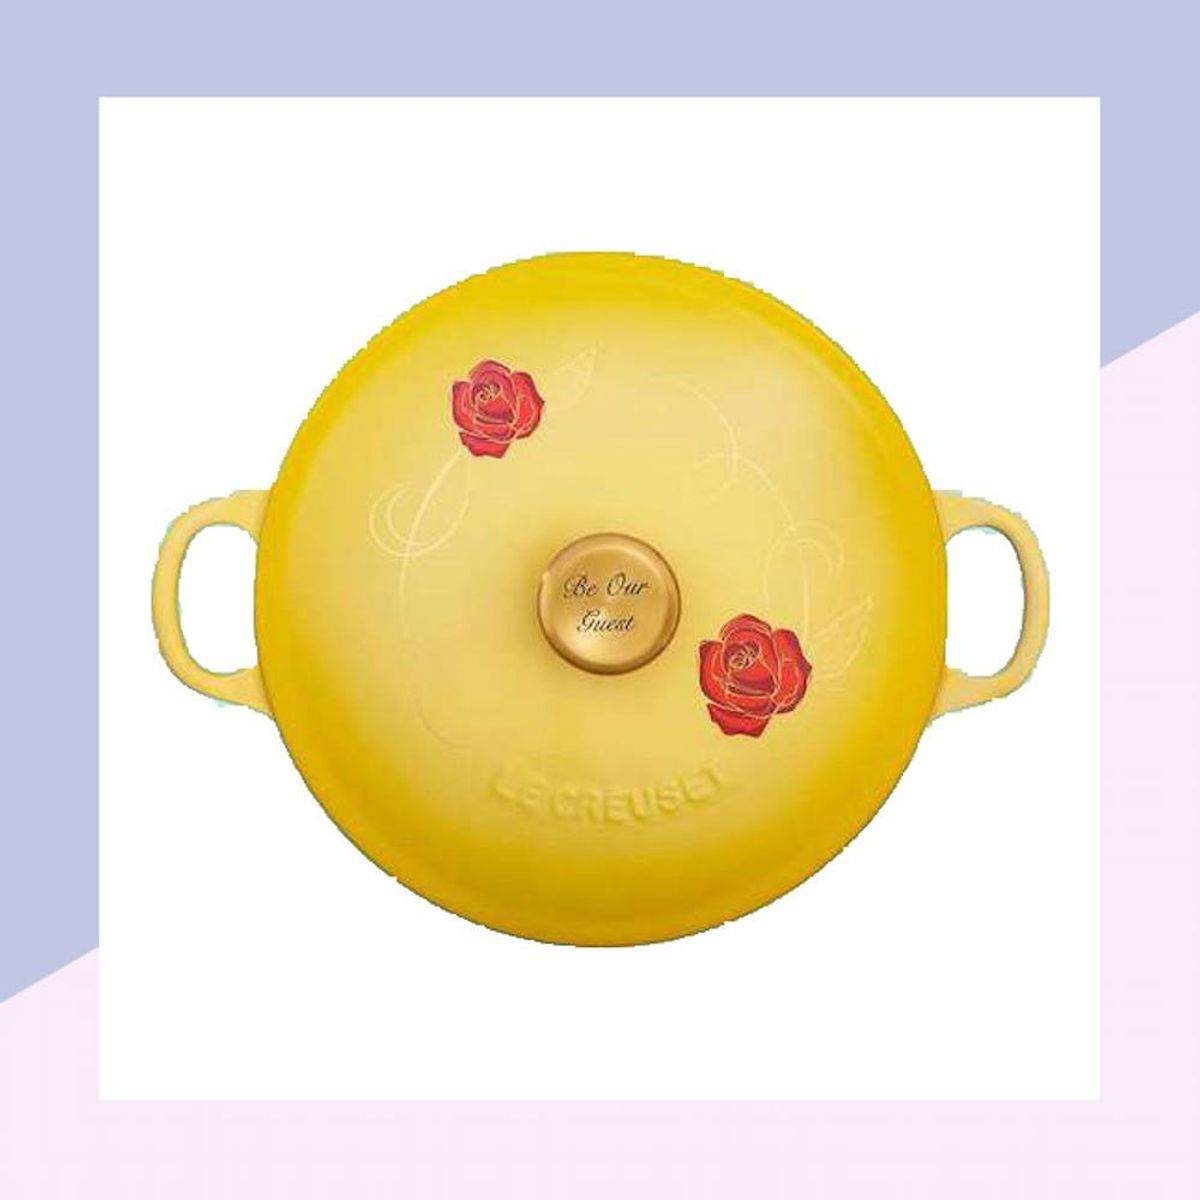 Le Creuset Is Launching New “Beauty and the Beast” Cookware